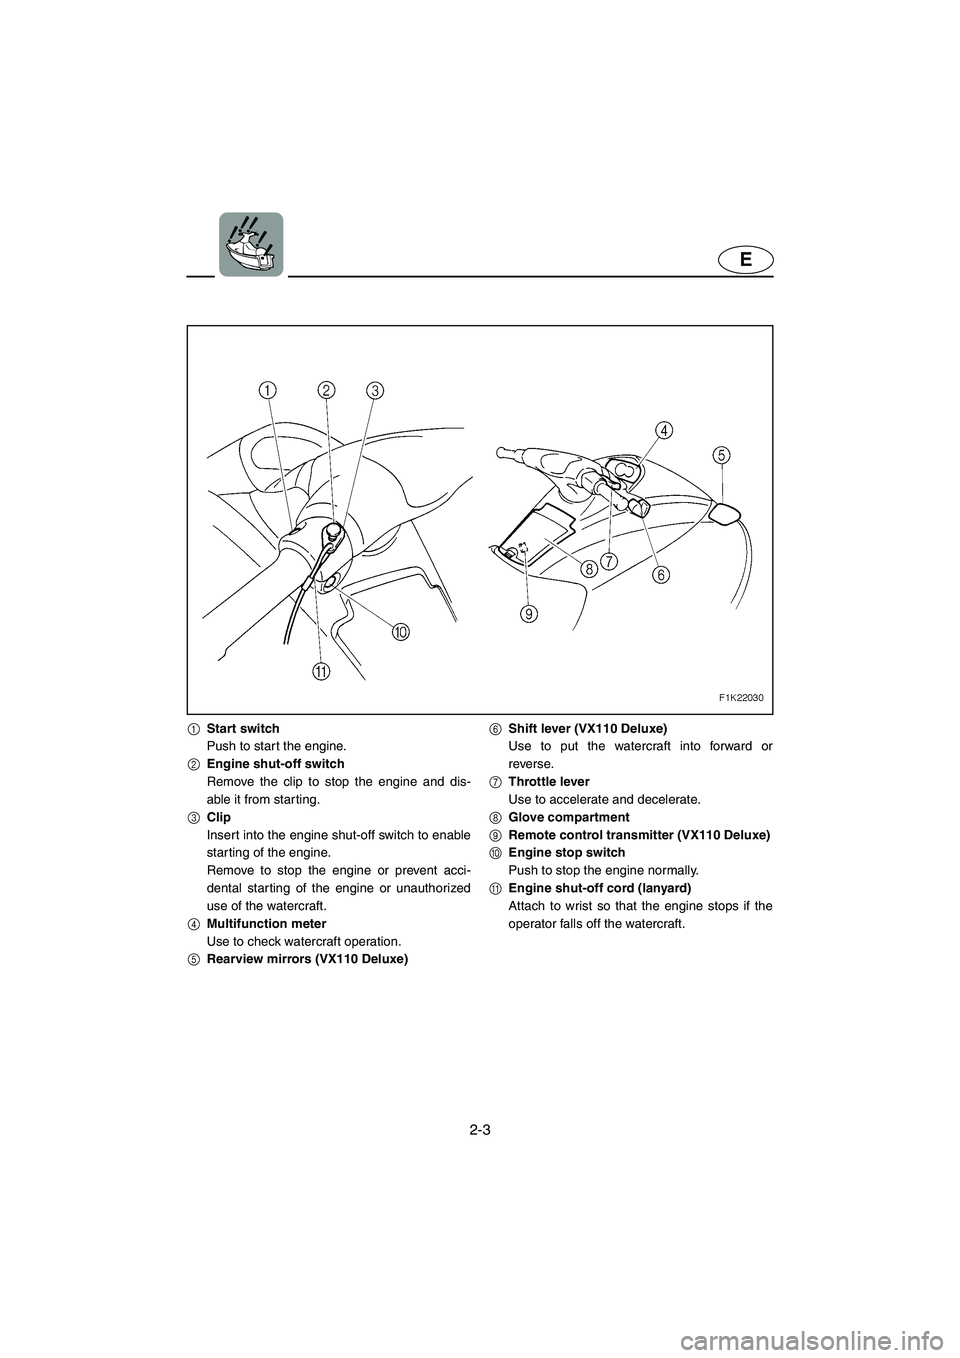 YAMAHA VX 2005  Owners Manual 2-3
E
1Start switch
Push to start the engine.
2Engine shut-off switch
Remove the clip to stop the engine and dis-
able it from starting.
3Clip
Insert into the engine shut-off switch to enable
starting